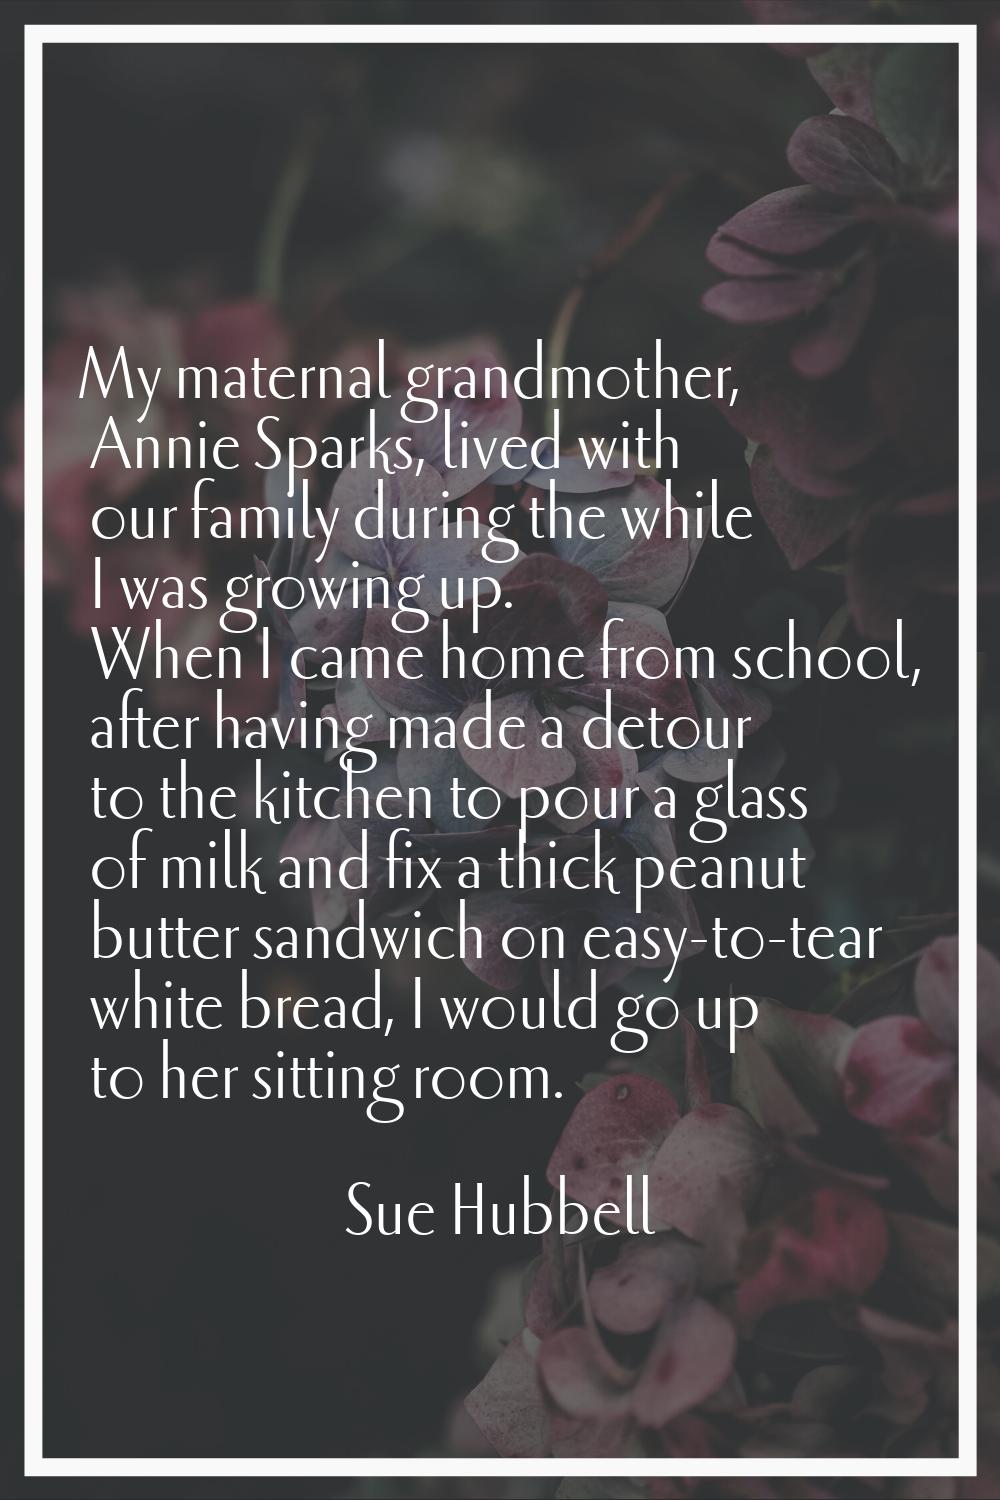 My maternal grandmother, Annie Sparks, lived with our family during the while I was growing up. Whe